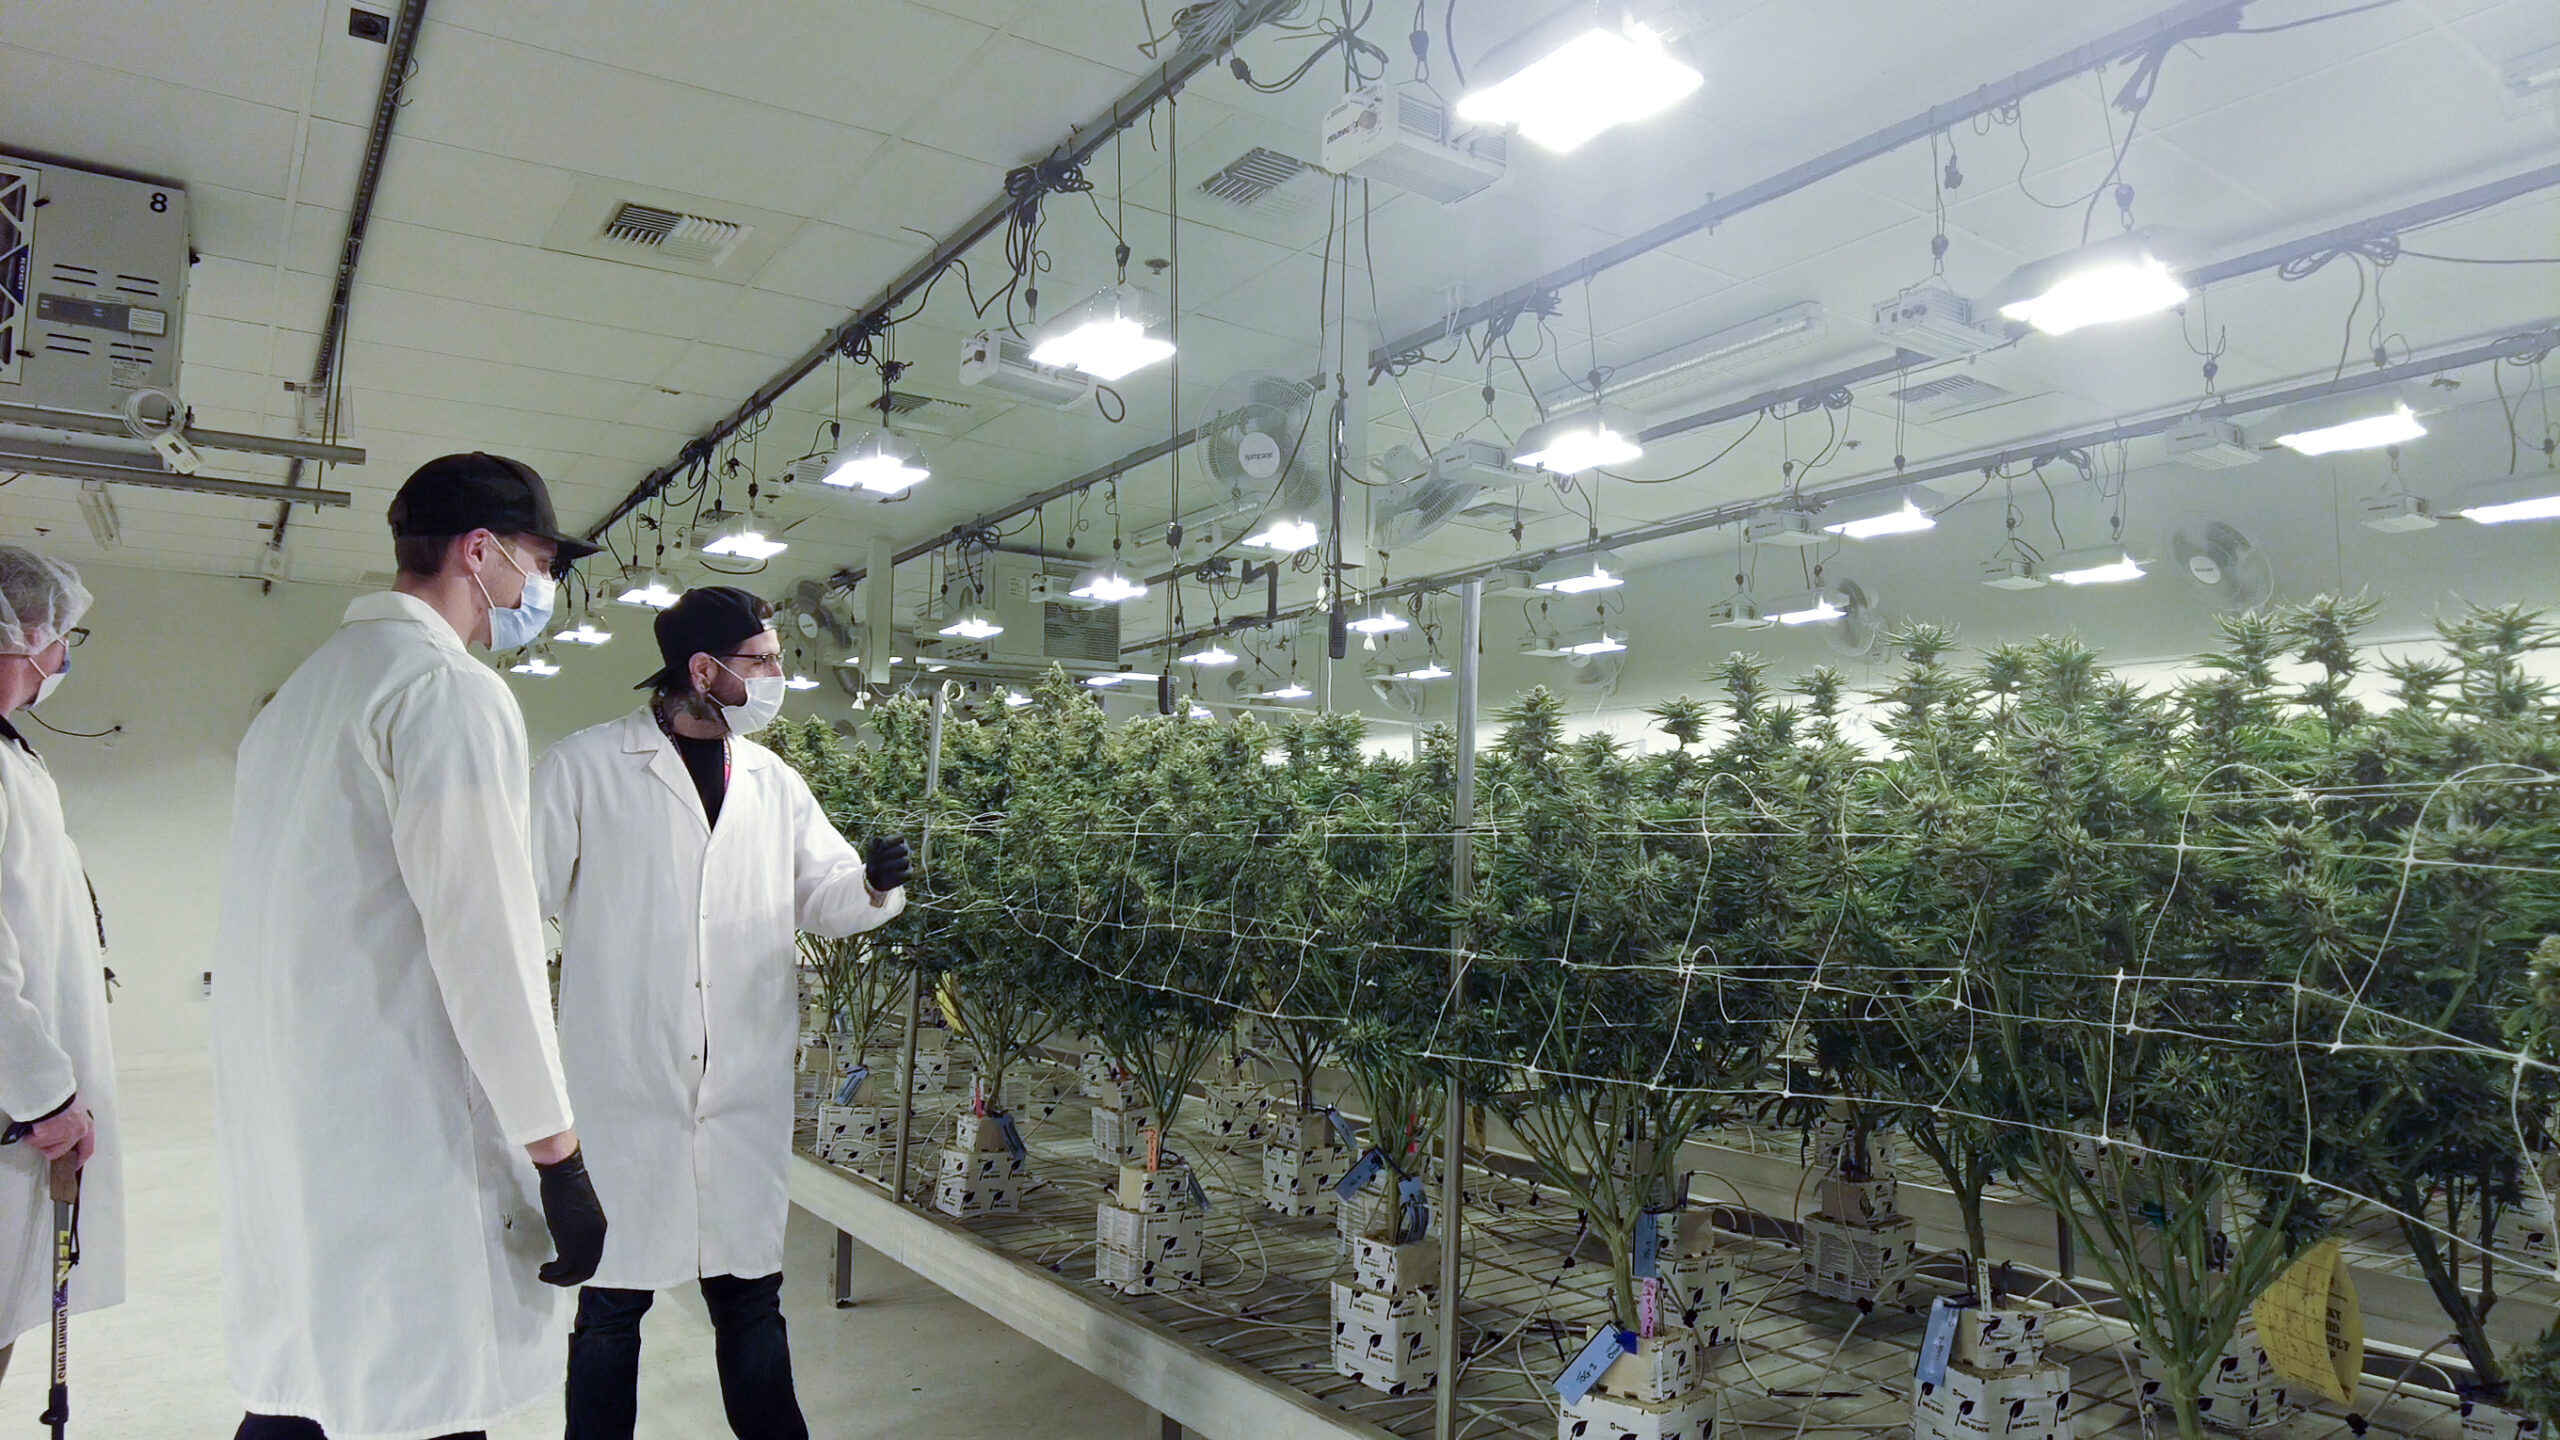 State Flower Cannabis on the Growing Pains of a Maturing Cannabis Industry